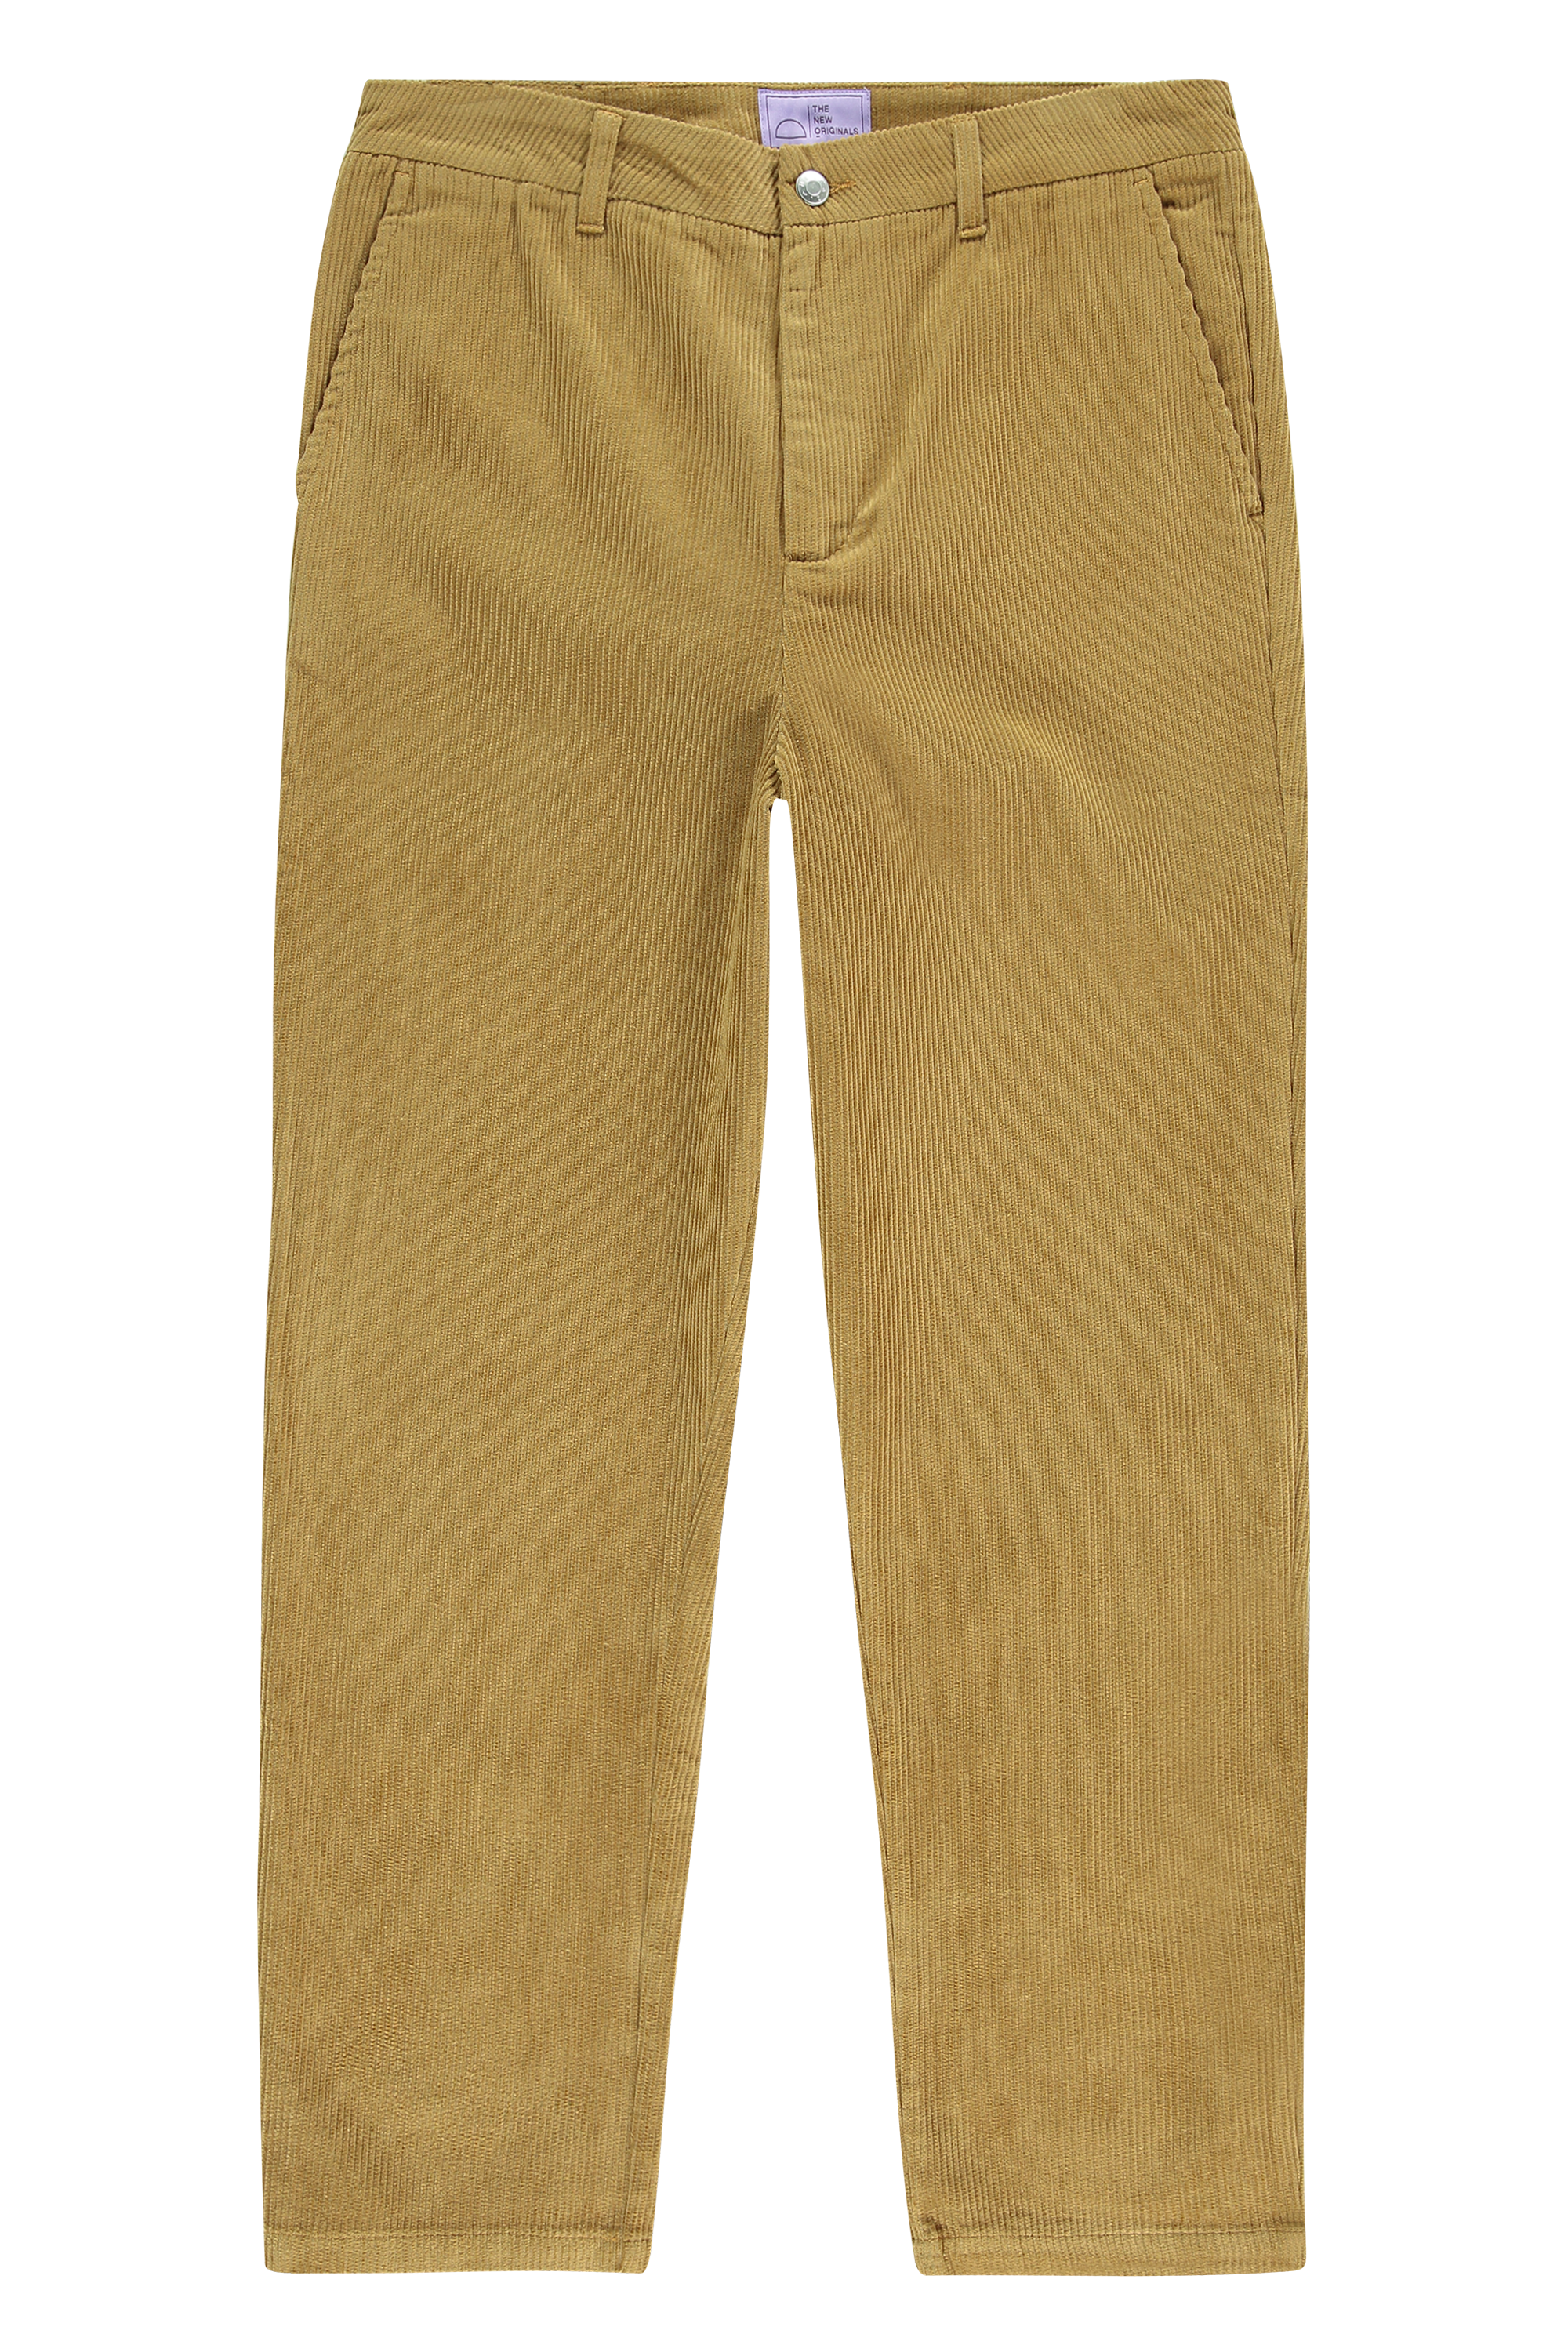 products-daviscorduroytrousers_mustard_front-png